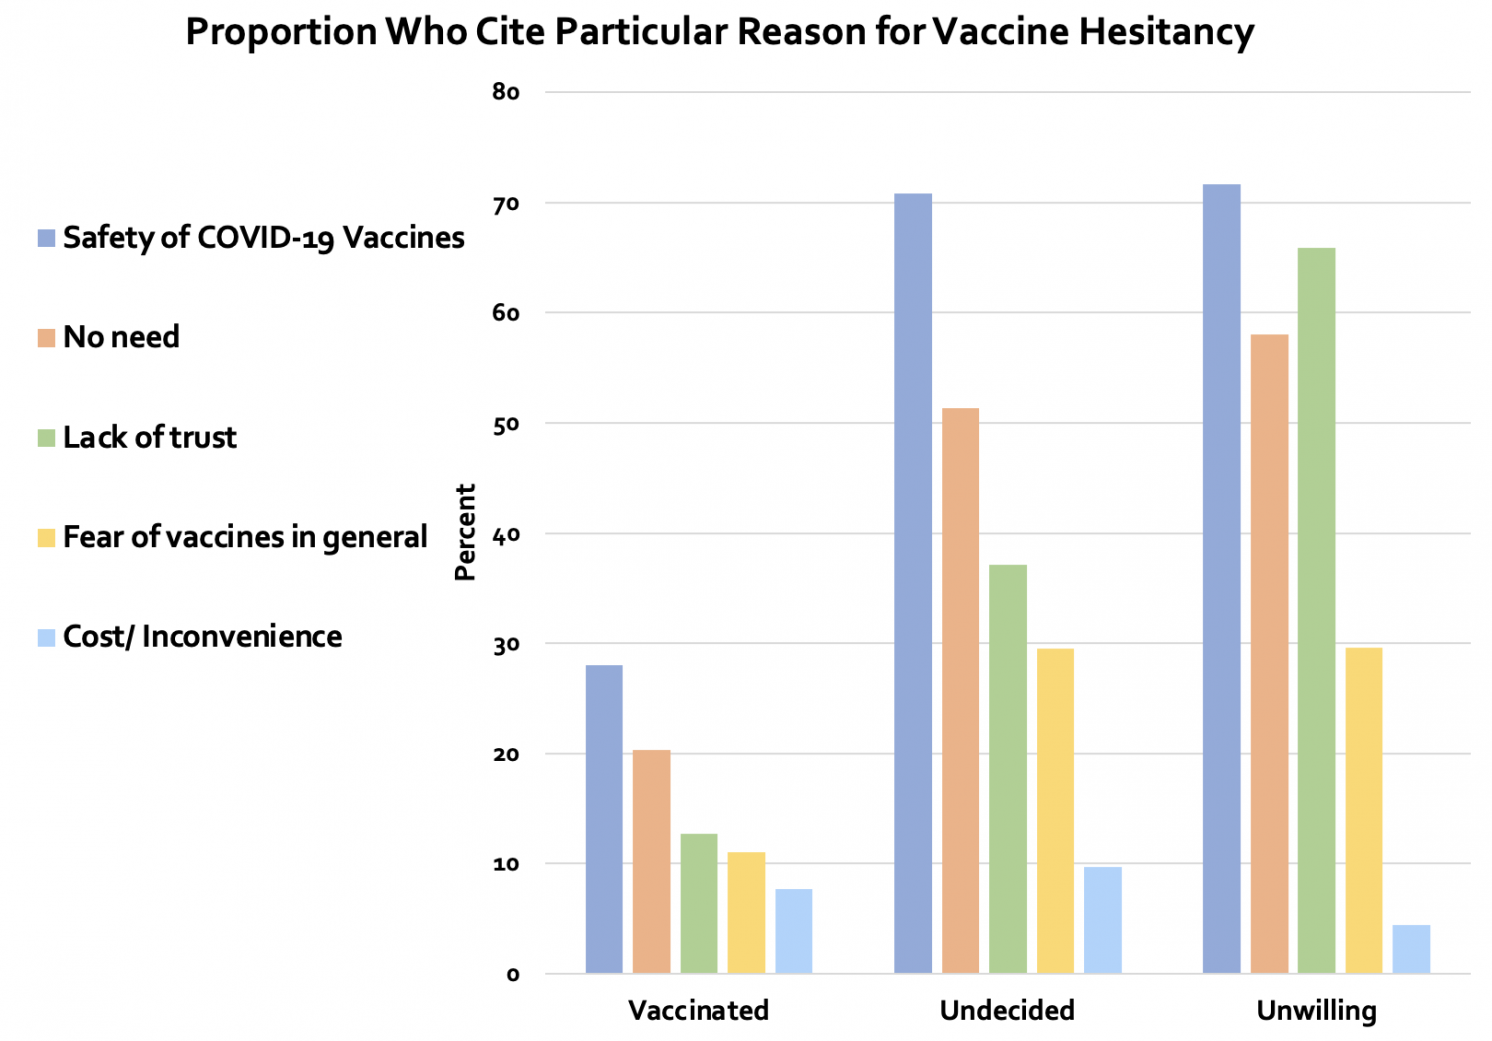 Figure 1a Proportion Who Cite Particular Reason for Vaccine Hesitancy 